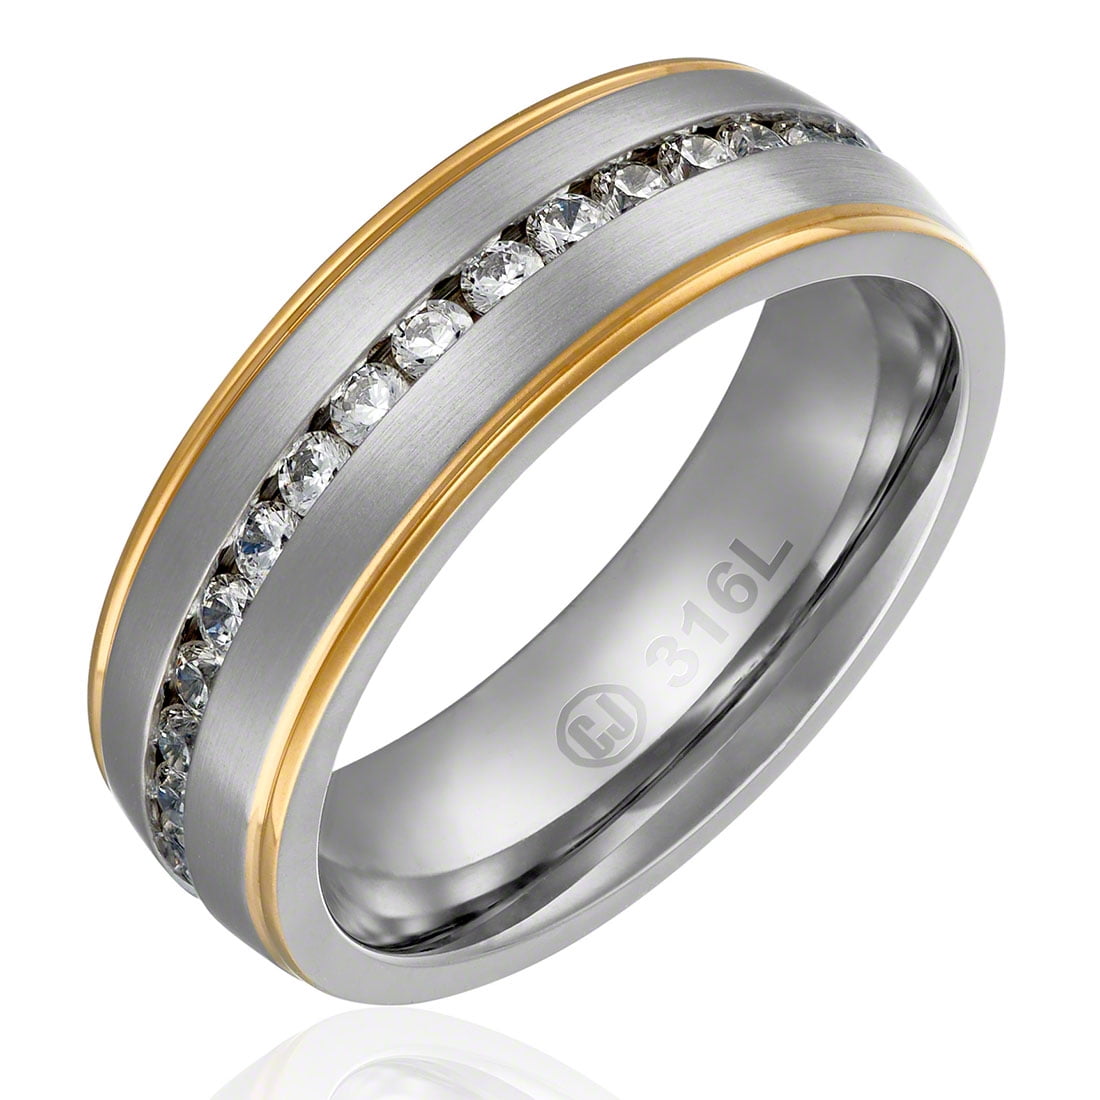 Men's Women's Stainless Steel 7mm Silver Gold Eternity CZ Wedding Band Ring 